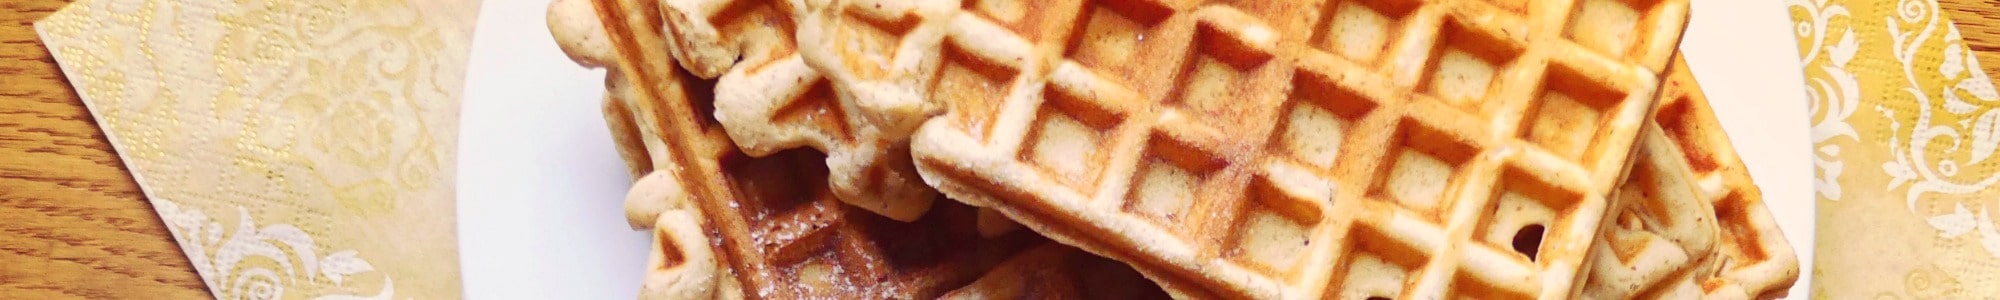 Pancakes and Waffles banner image